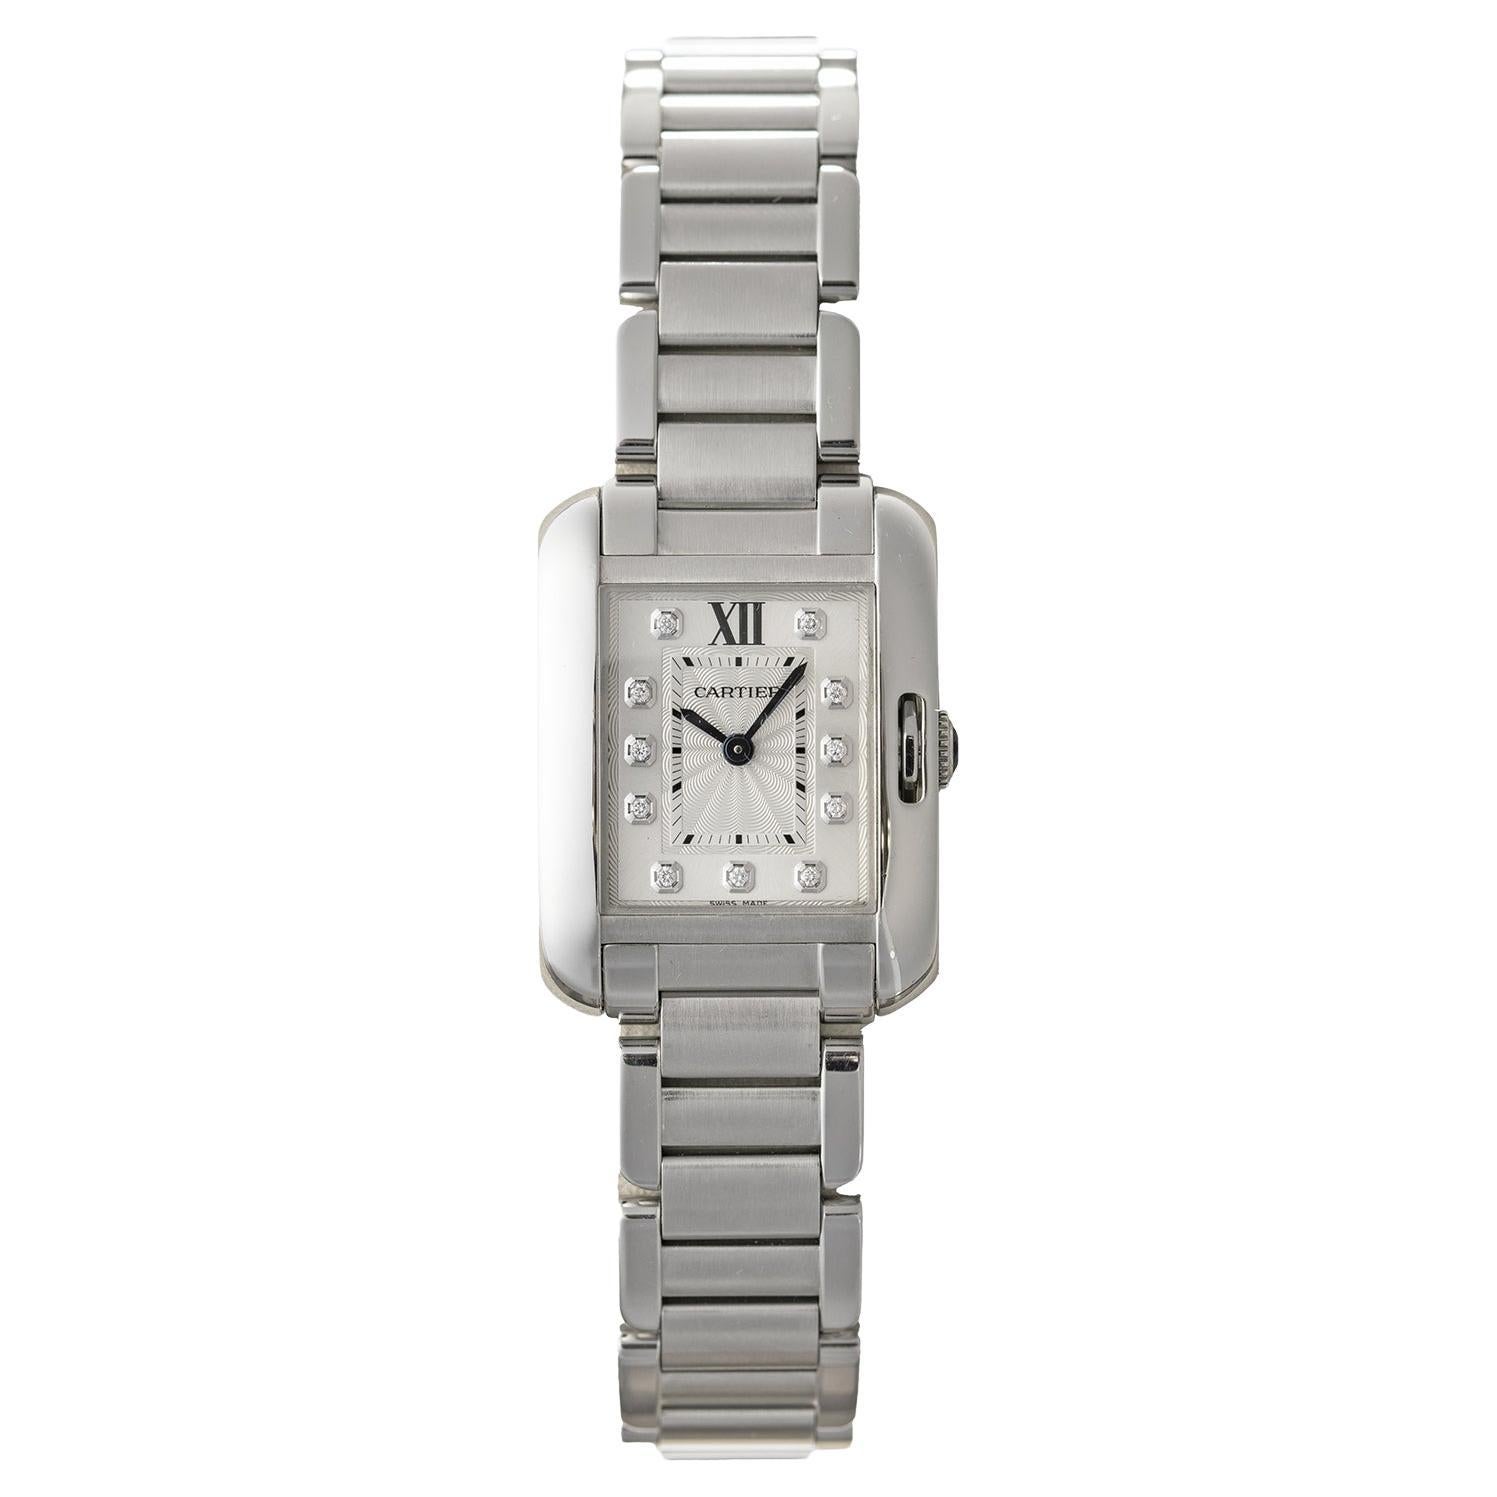 Cartier Tank Anglaise Small Steel (W4TA0003)